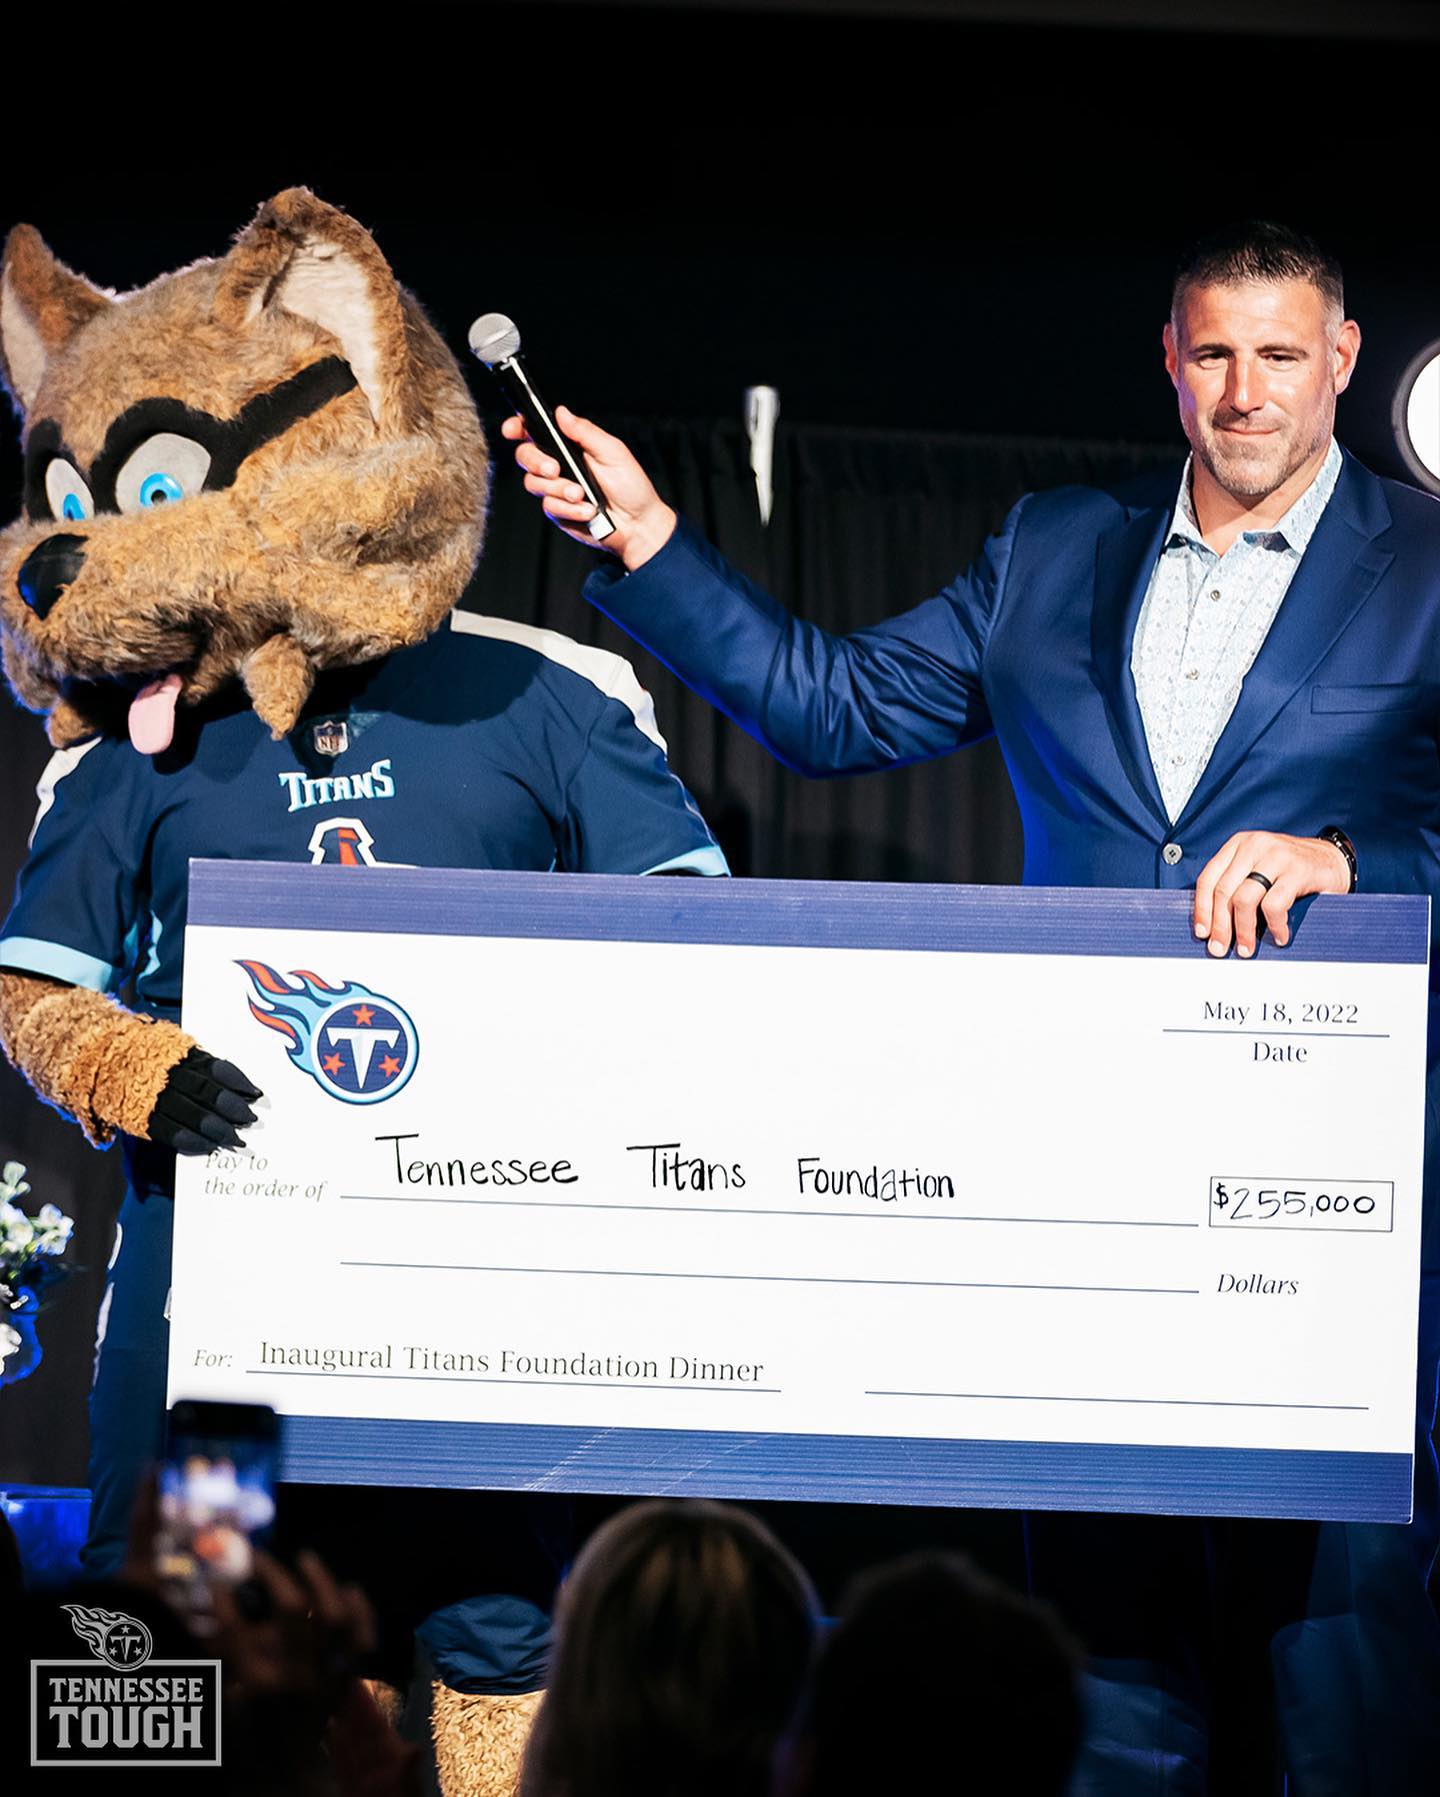 Our Titans Foundation Dinner raised $255,000 to assist those in need in the Midd...